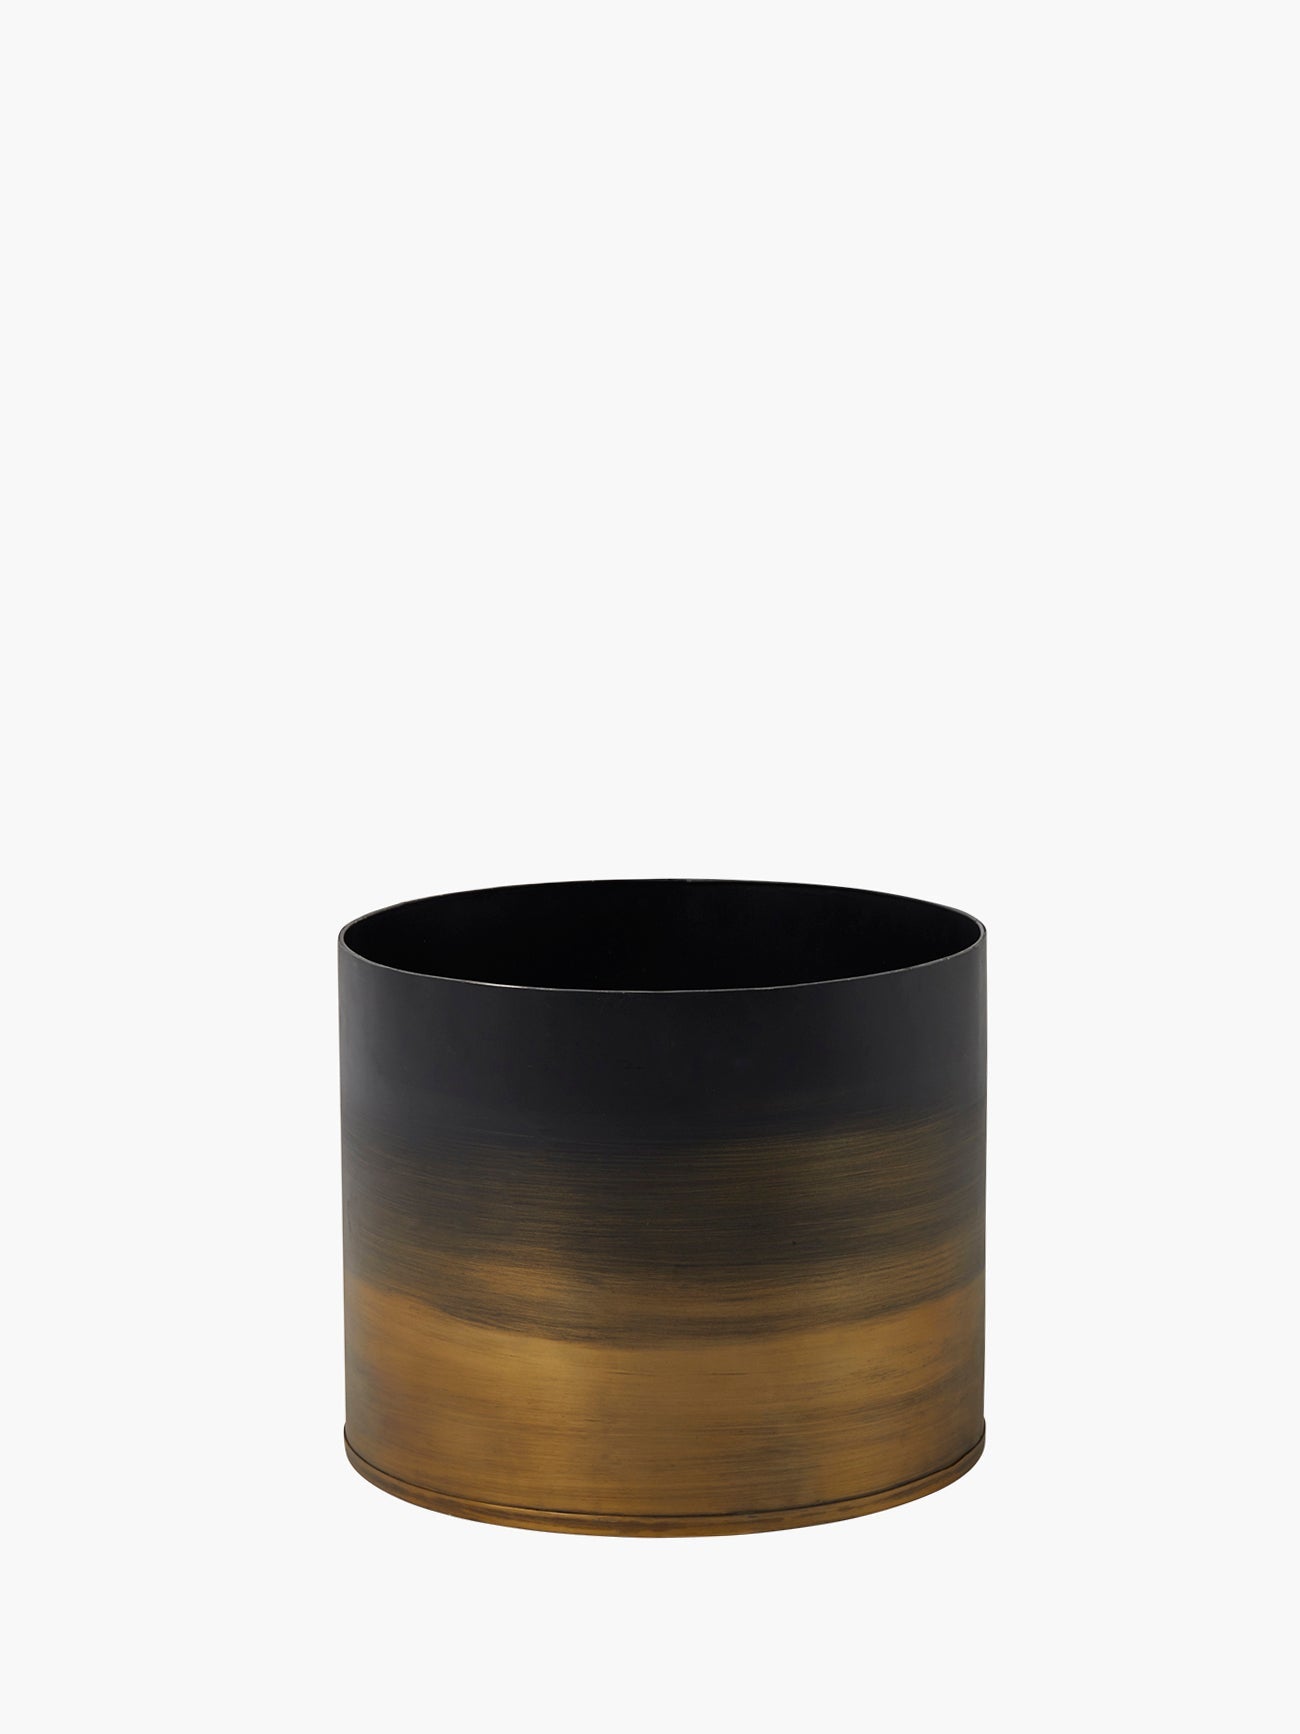 French Connection - Large Sundown Ombré Planter | French Connection |  Pots & Planters | One size - Black And Gold - Size: OS